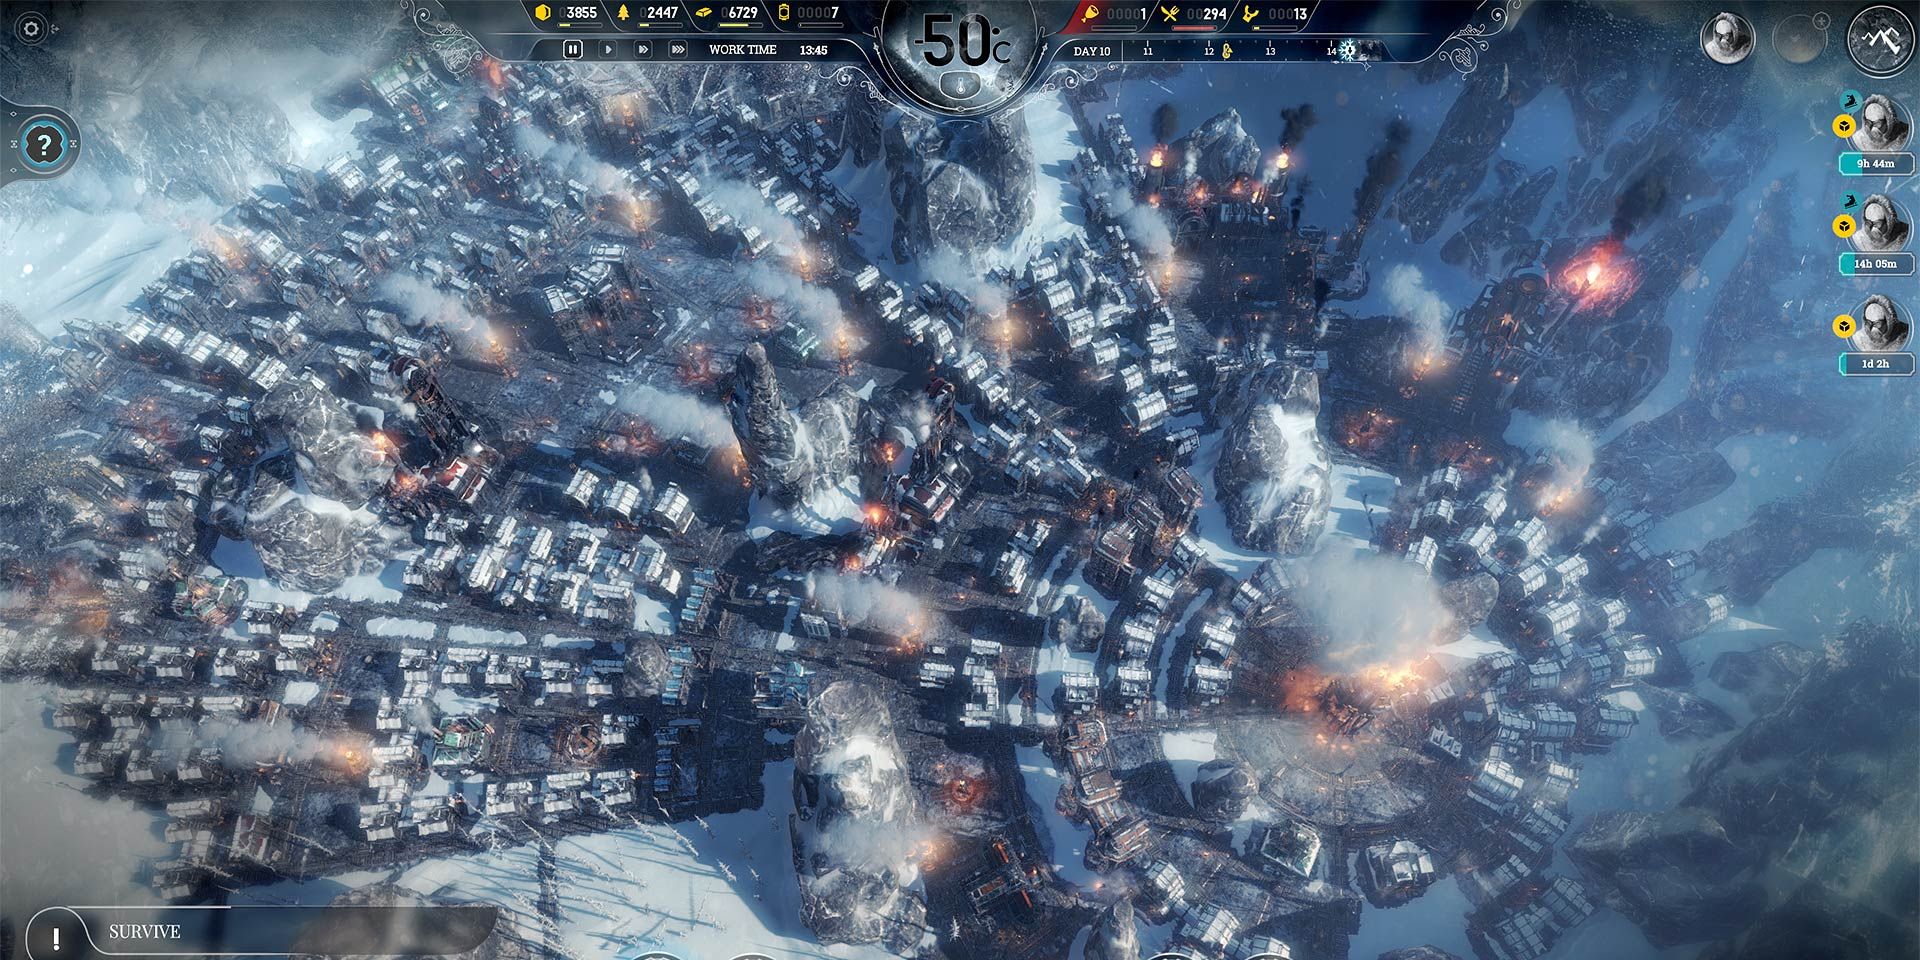 A relatively huge settlement in Frostpunk. Snow covered buildings fill the screen.